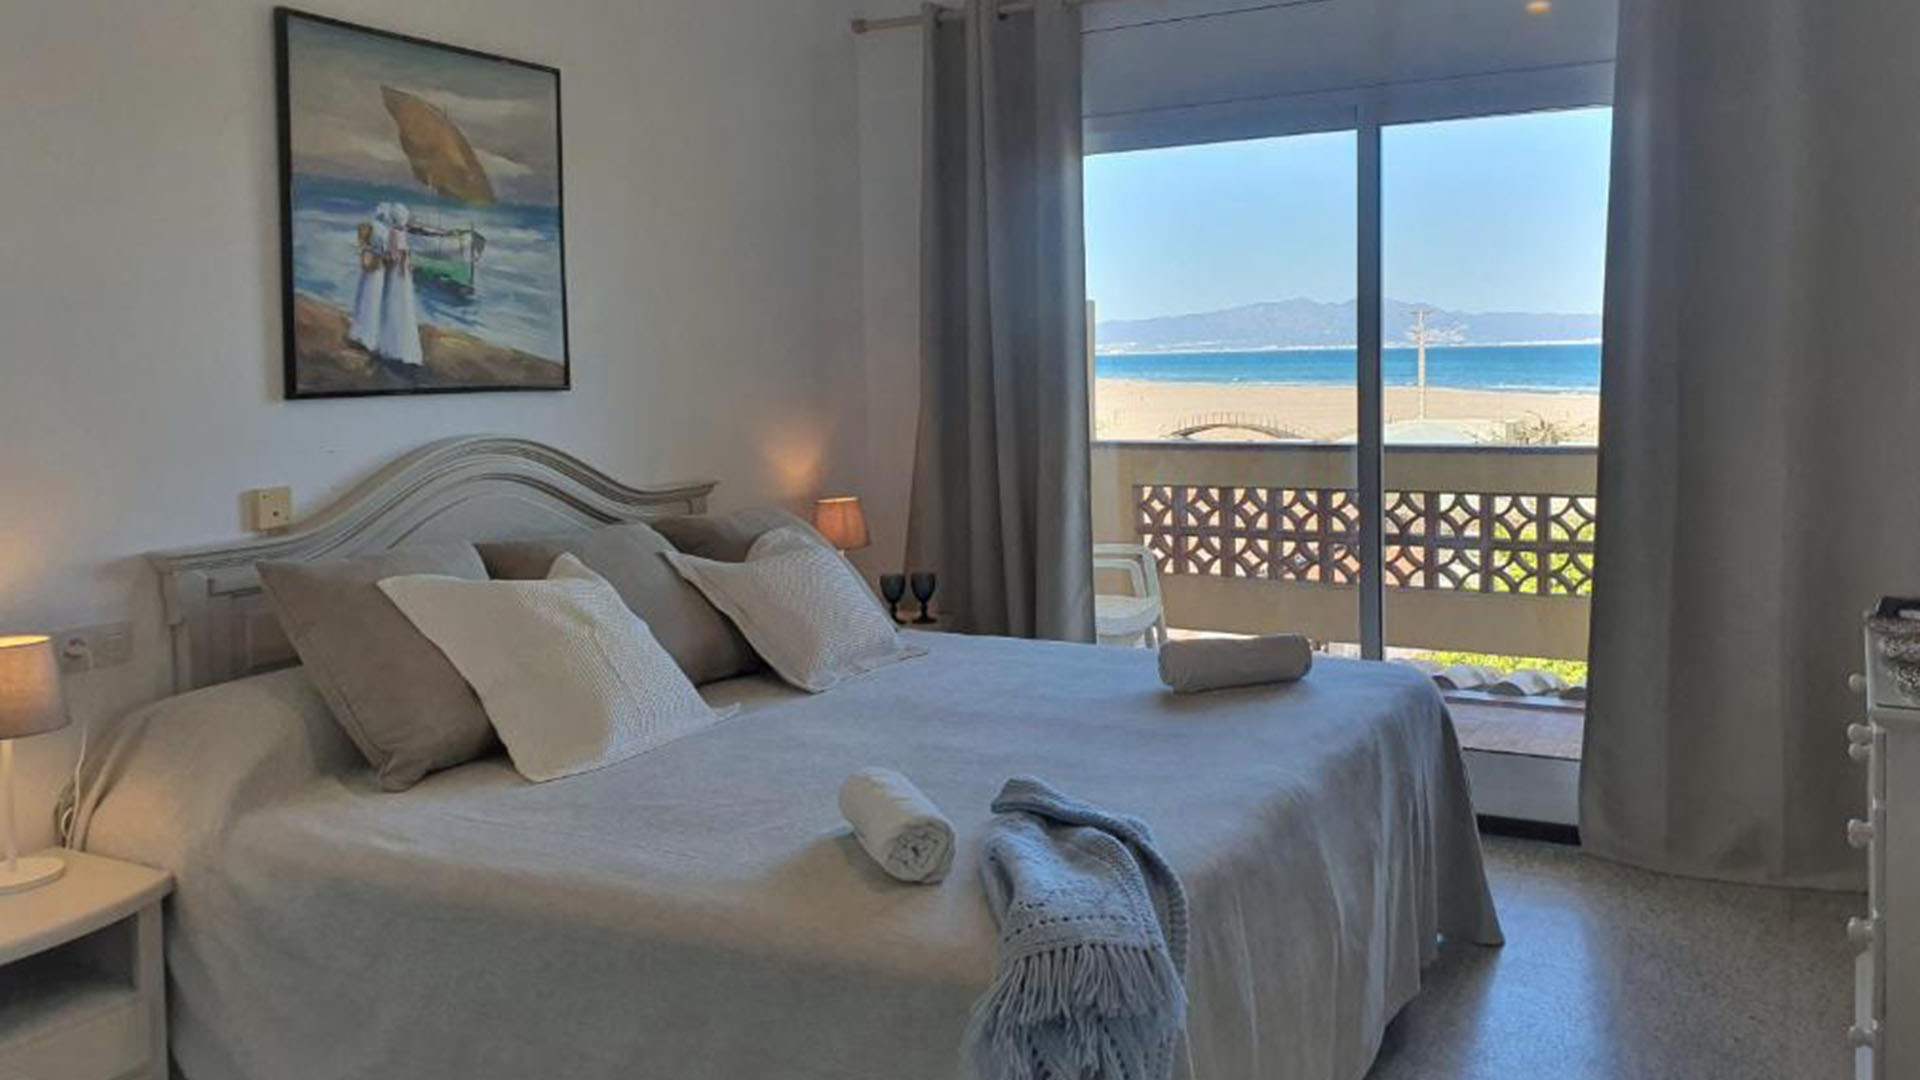 room with a view on the beach in Spain at rio mar hotel